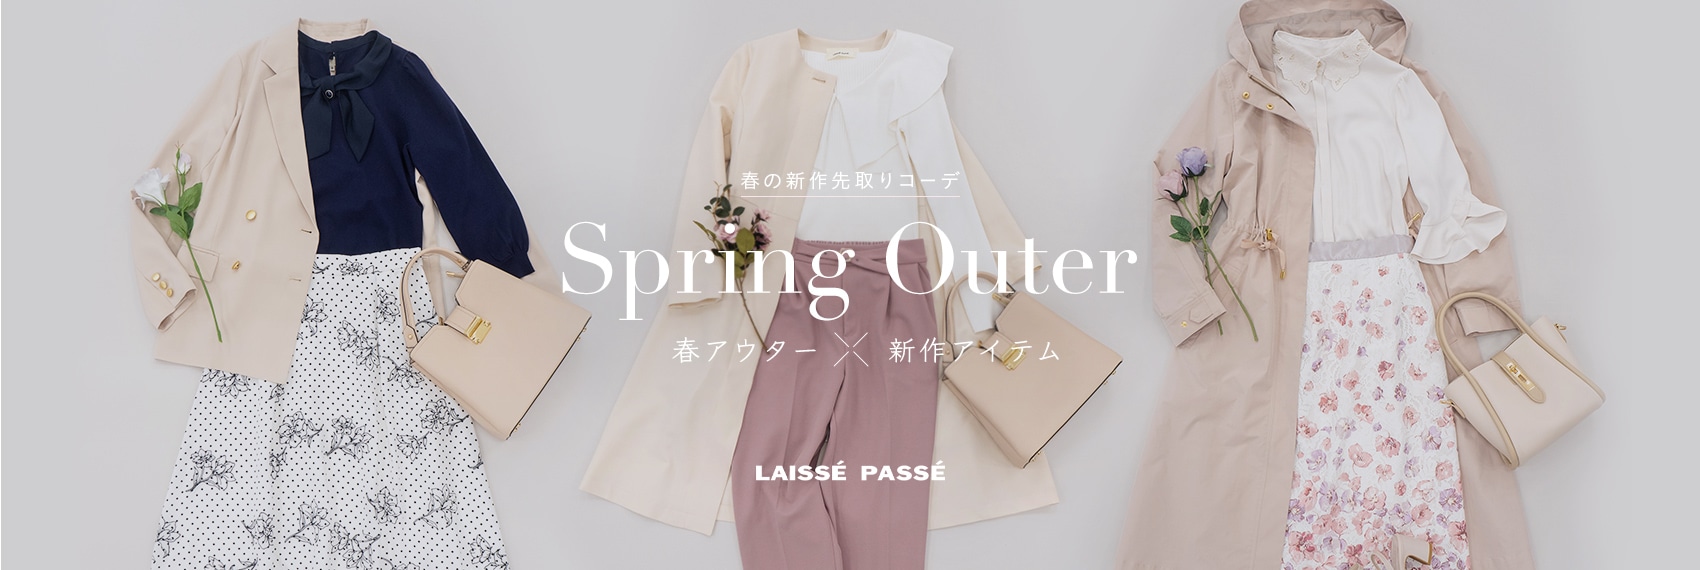 LAISSE PASSE Spring Outer 春アウター✕新作アイテム 春の新作先取りコーデ